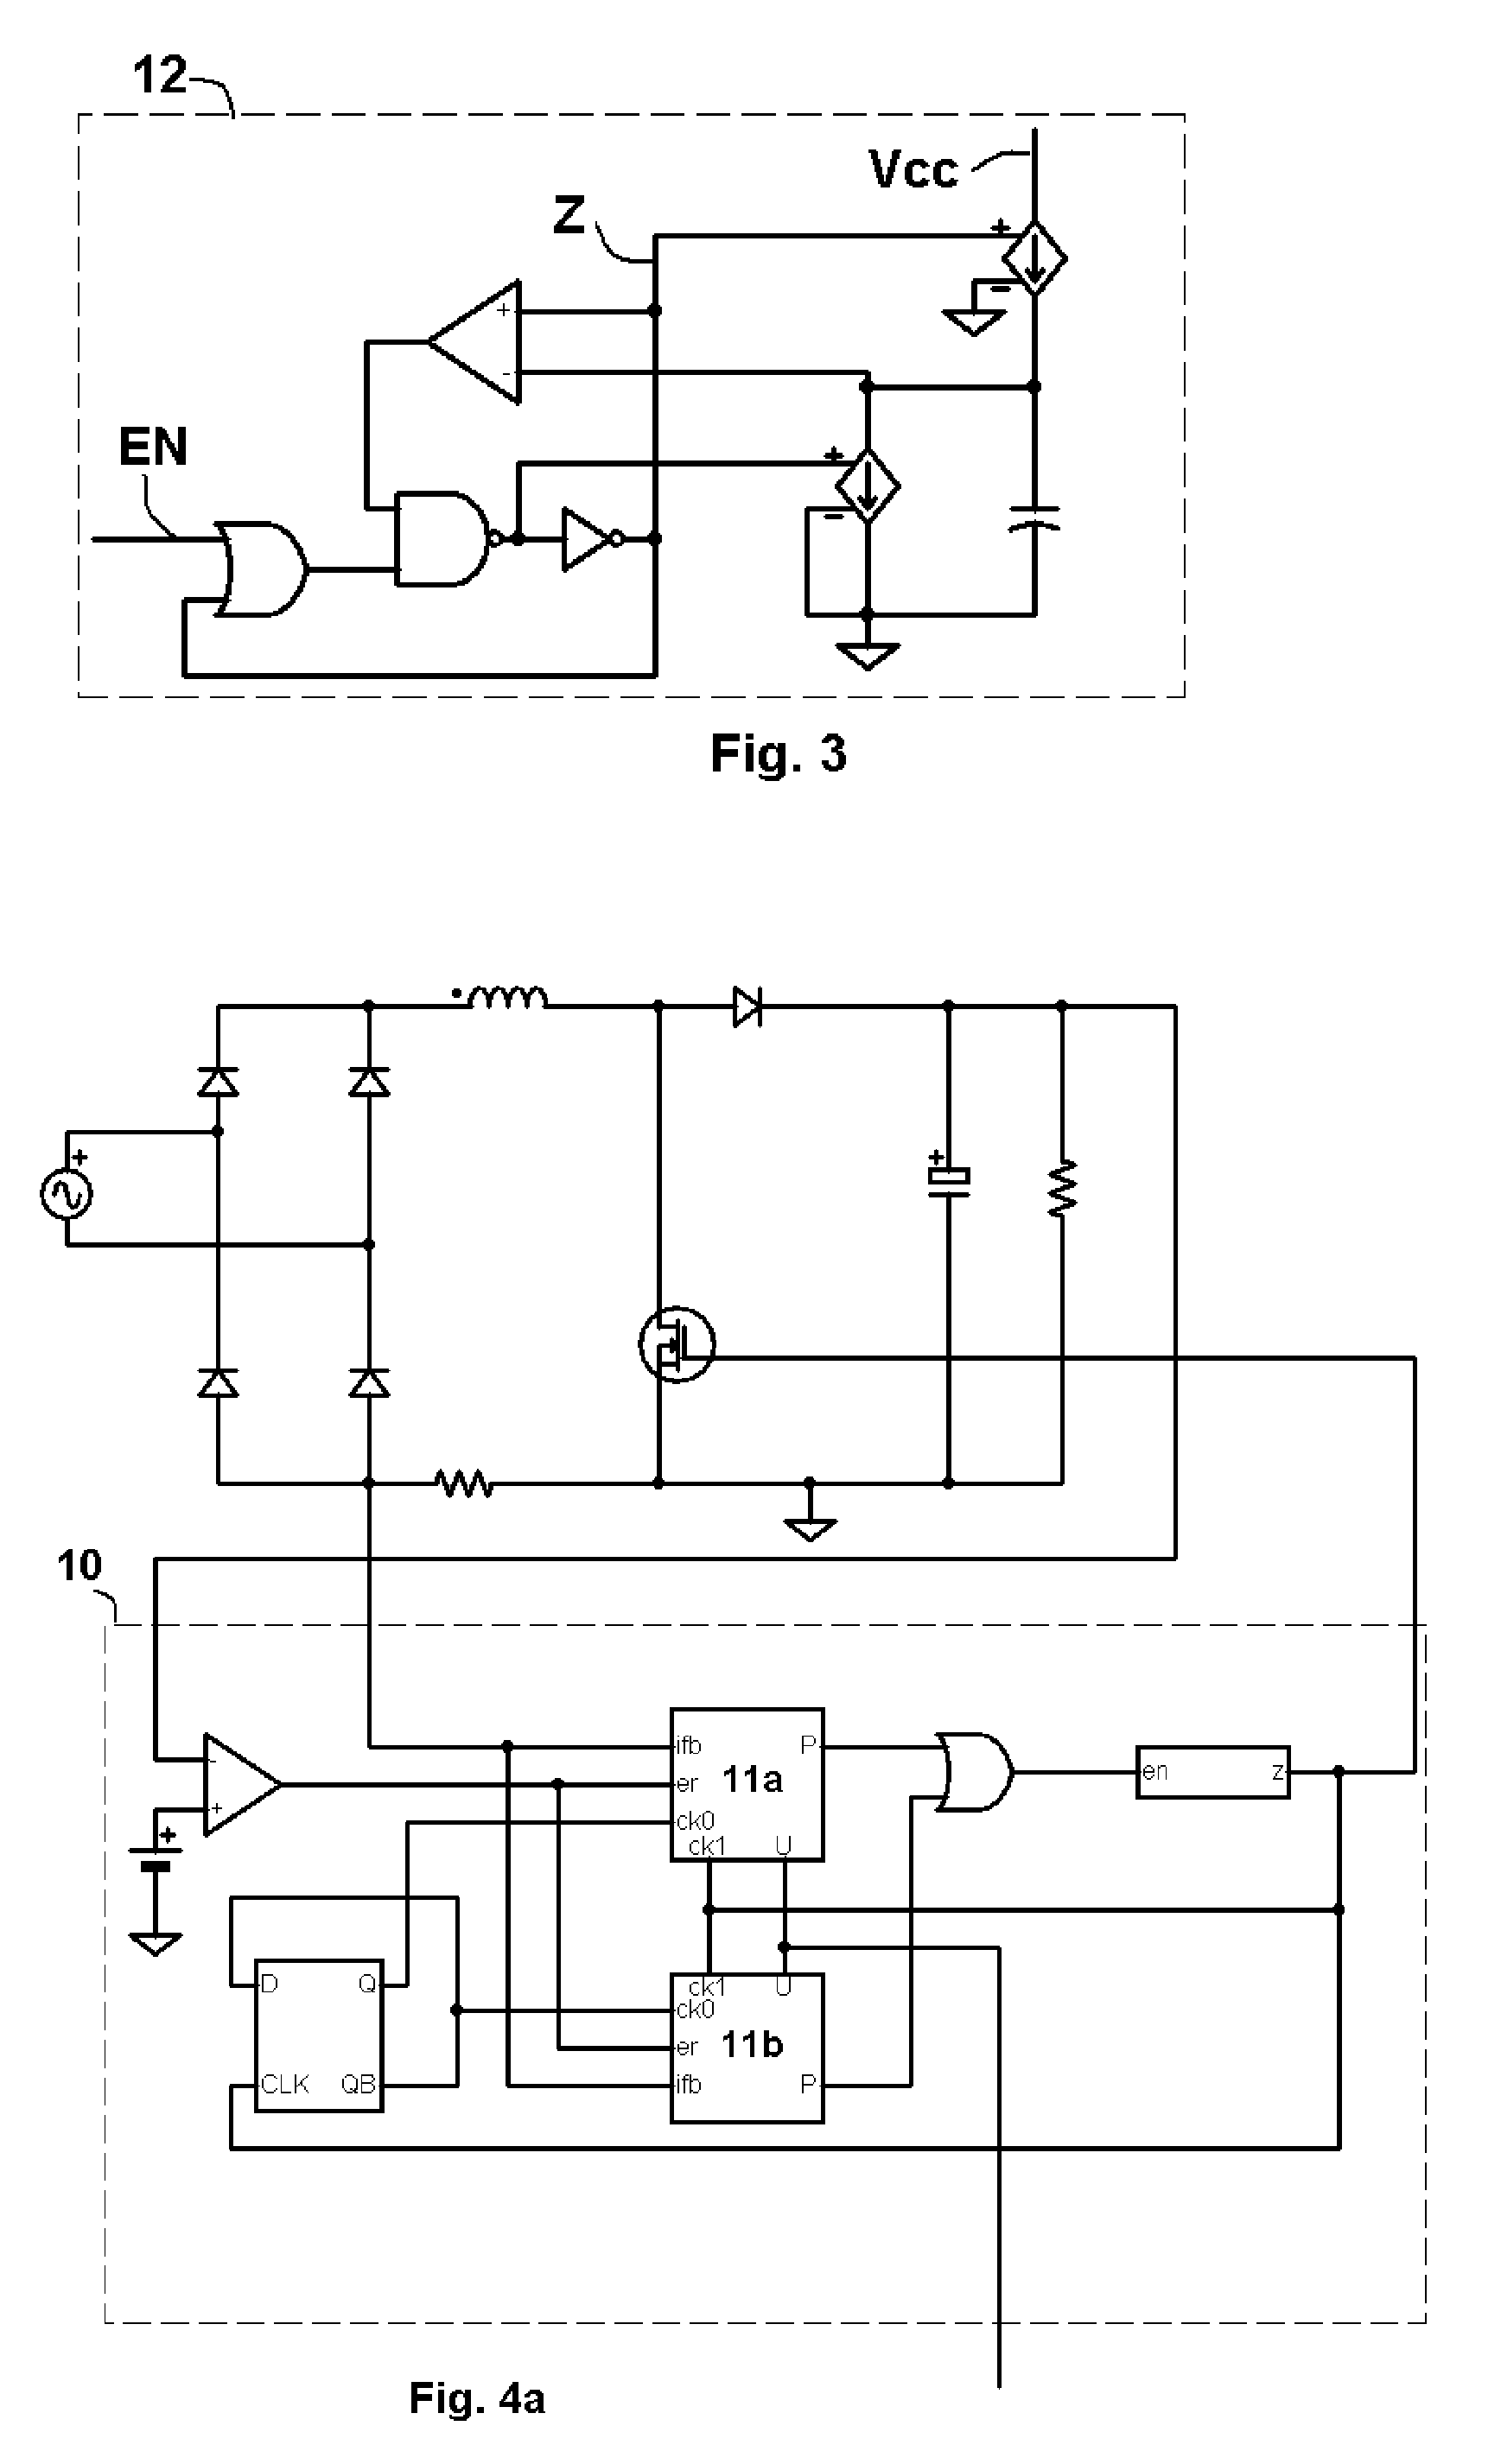 Method and apparatus for active power factor correction without sensing the line voltage